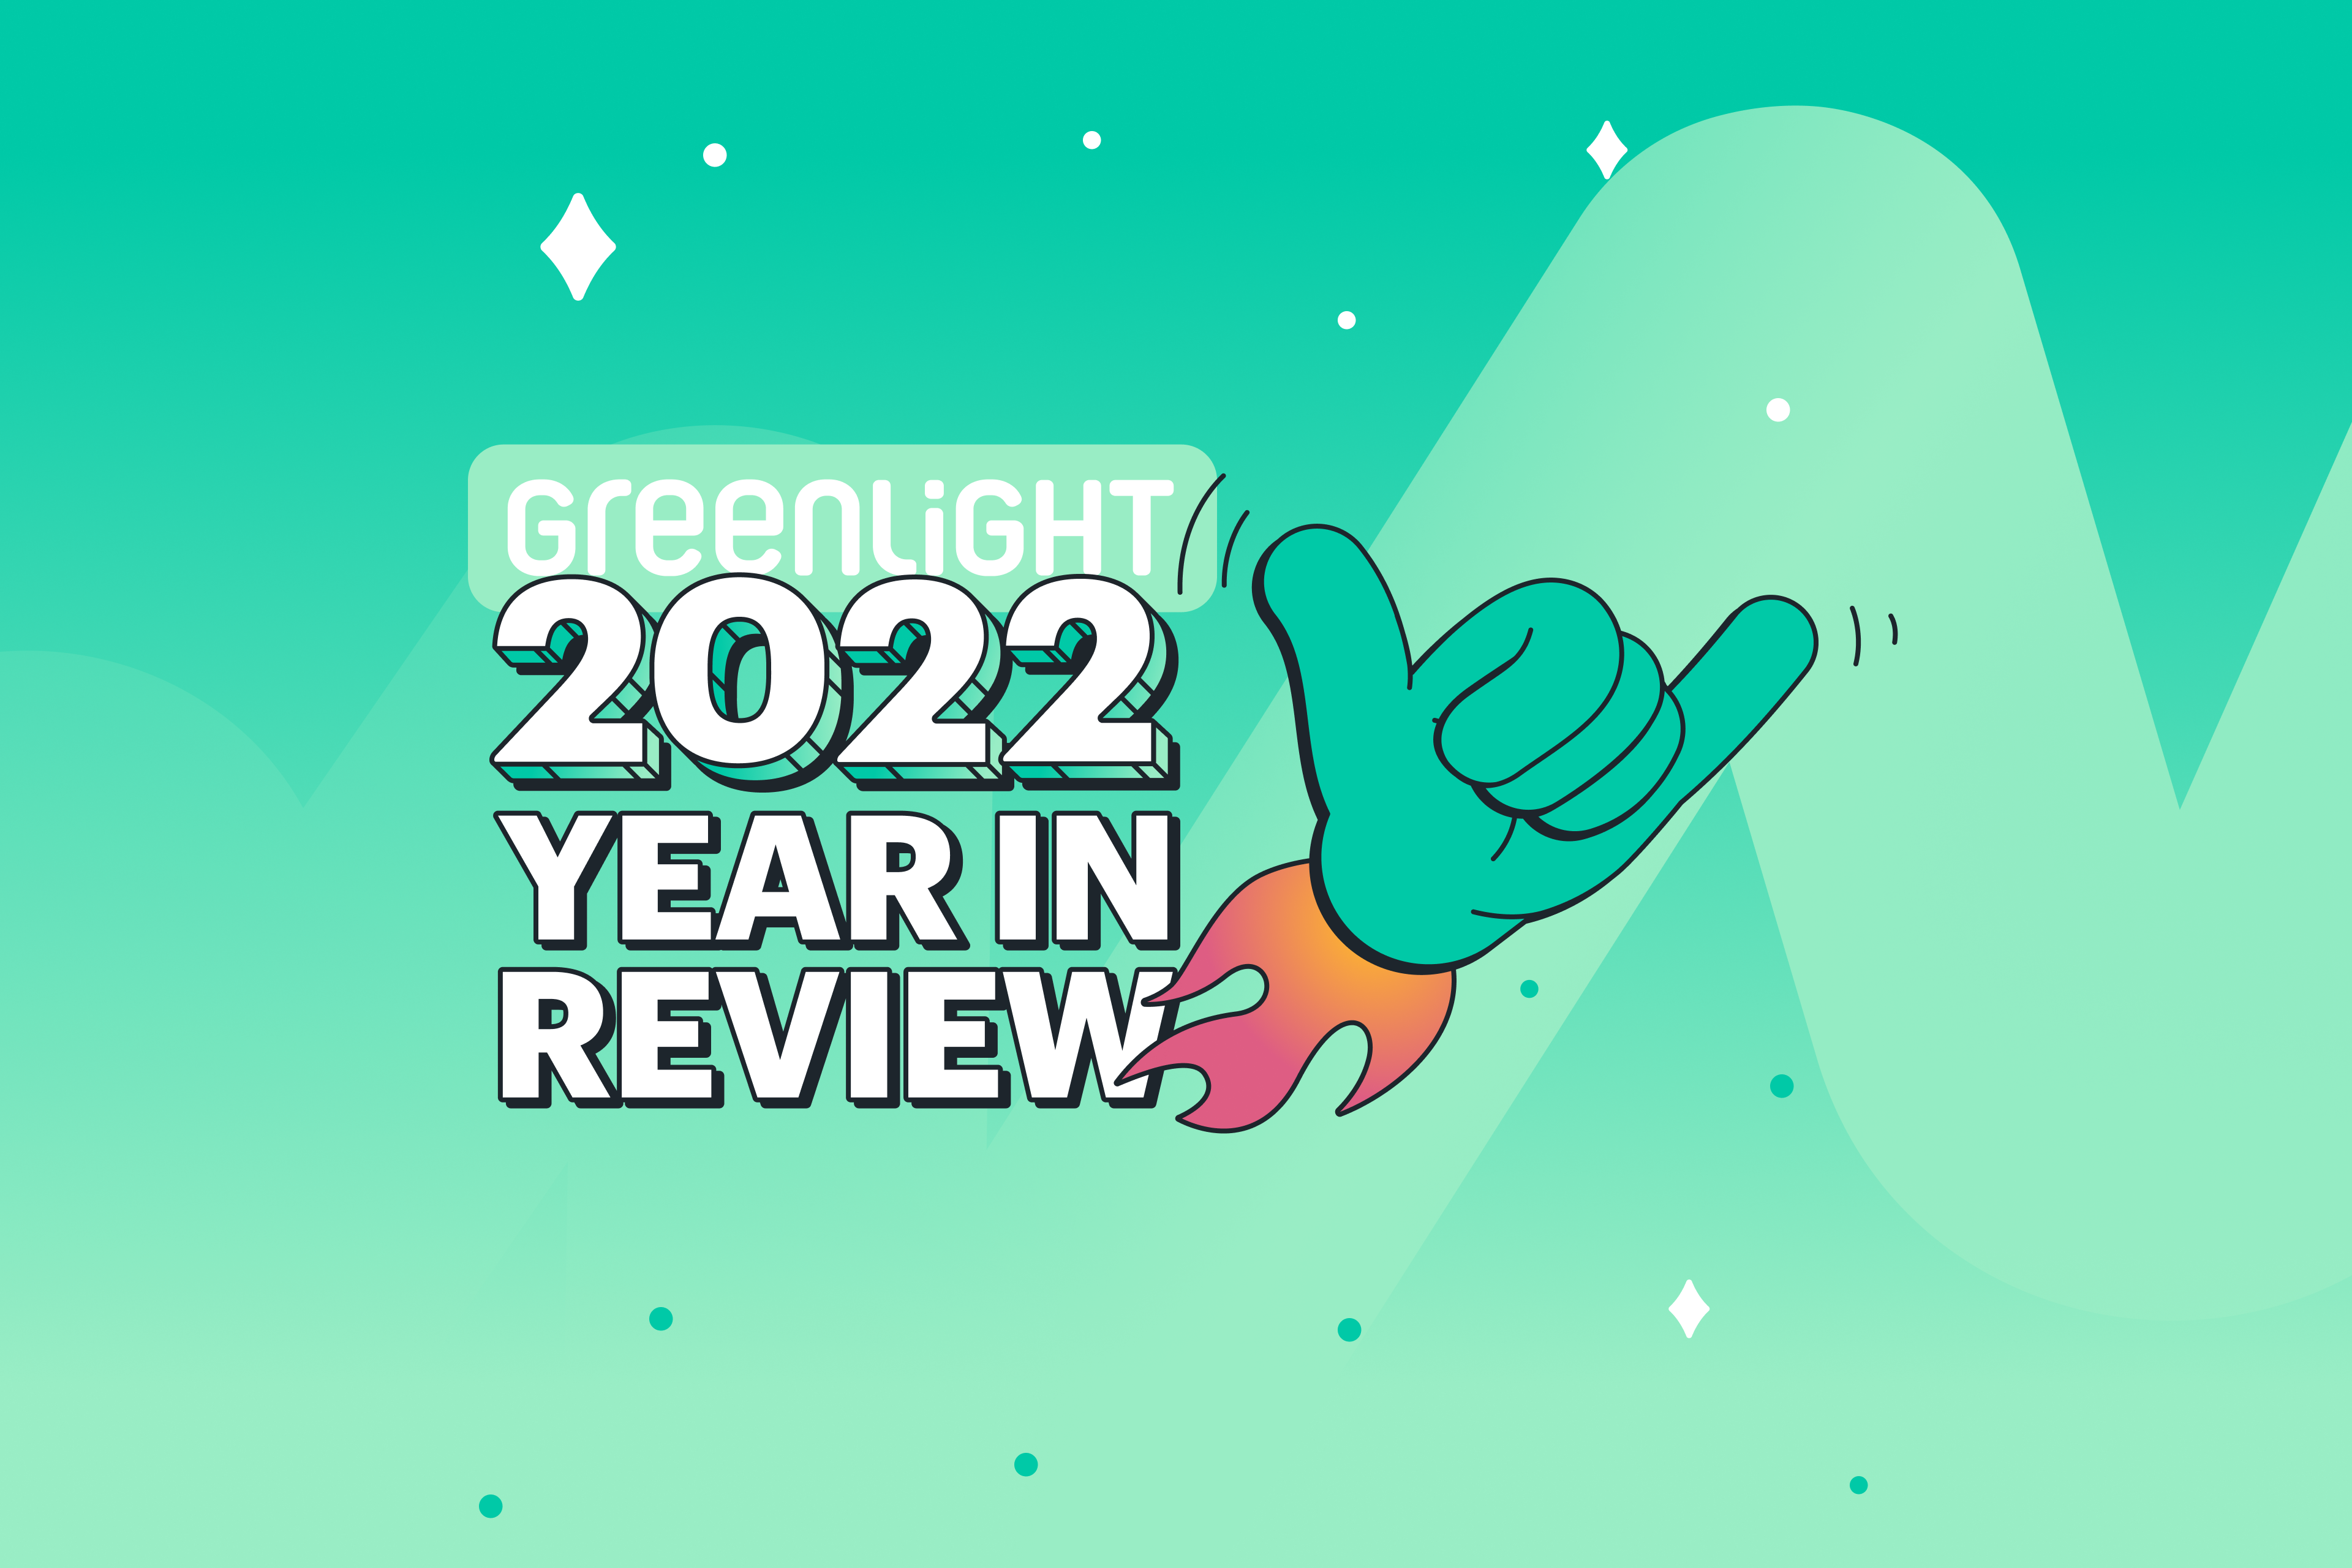 Greenlight's 2022 Year in Review blog